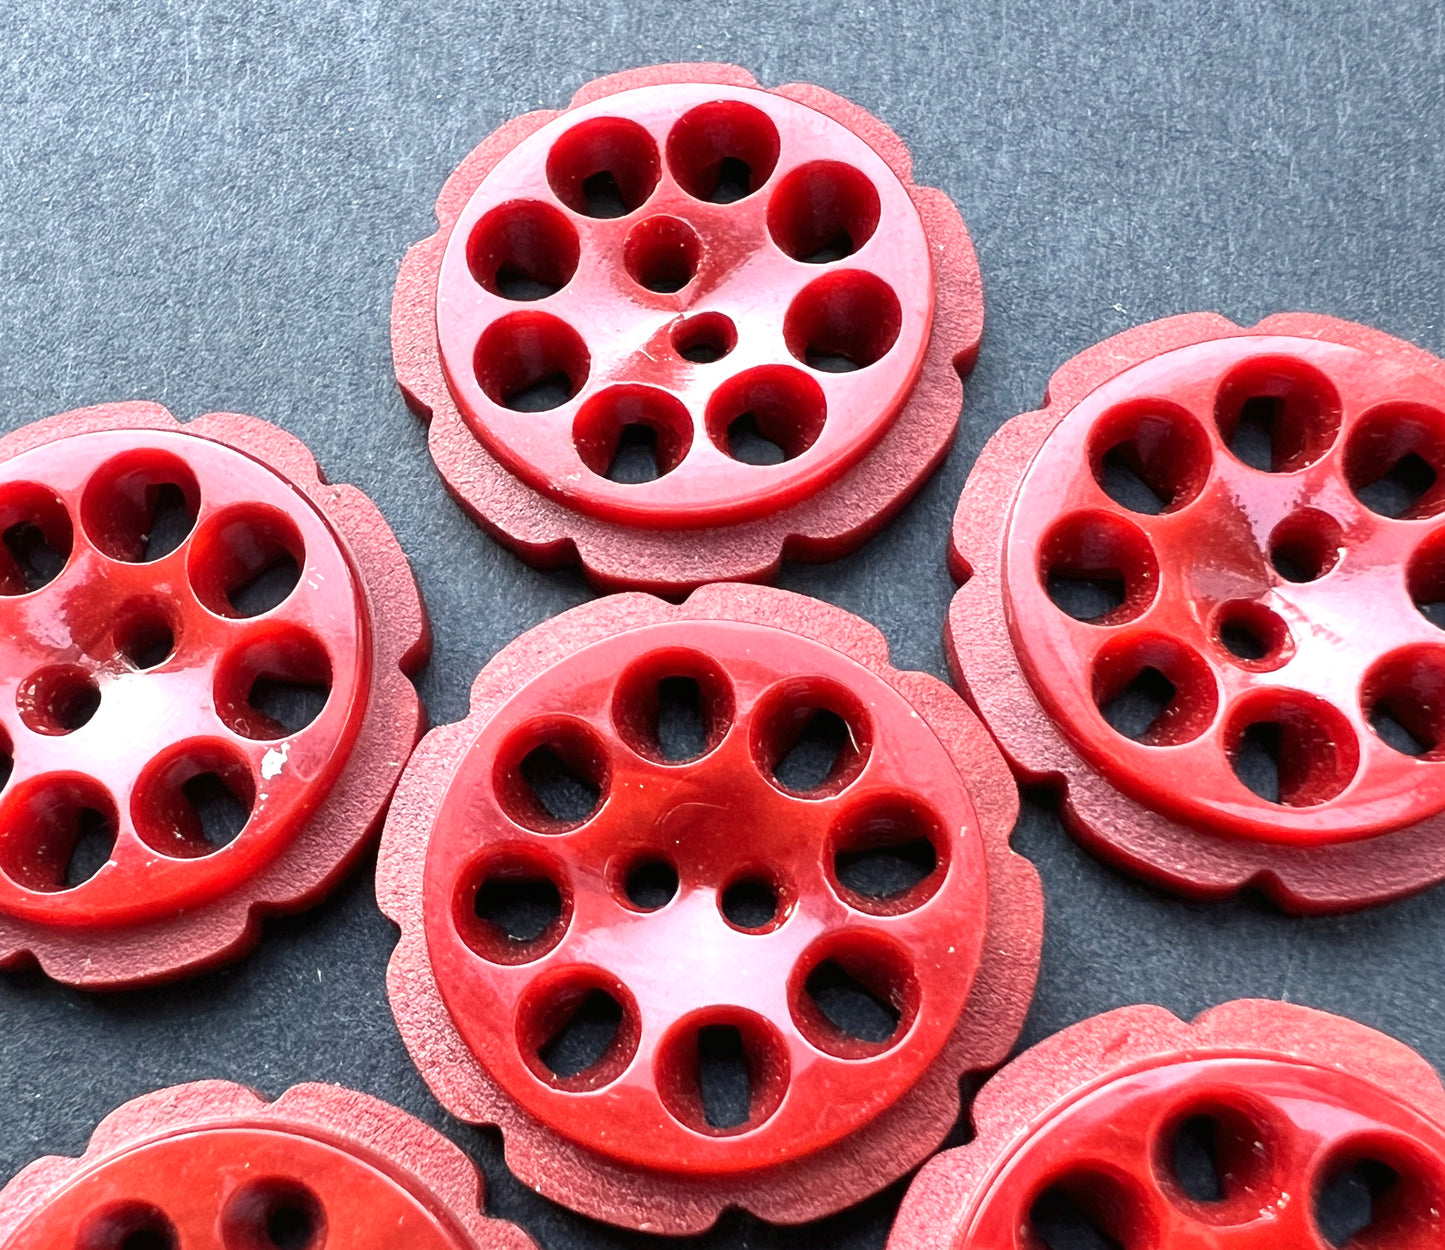 Brick Red 1.7cm or 2.2cm Vintage French Buttons - 6 or 24 on Sheet.